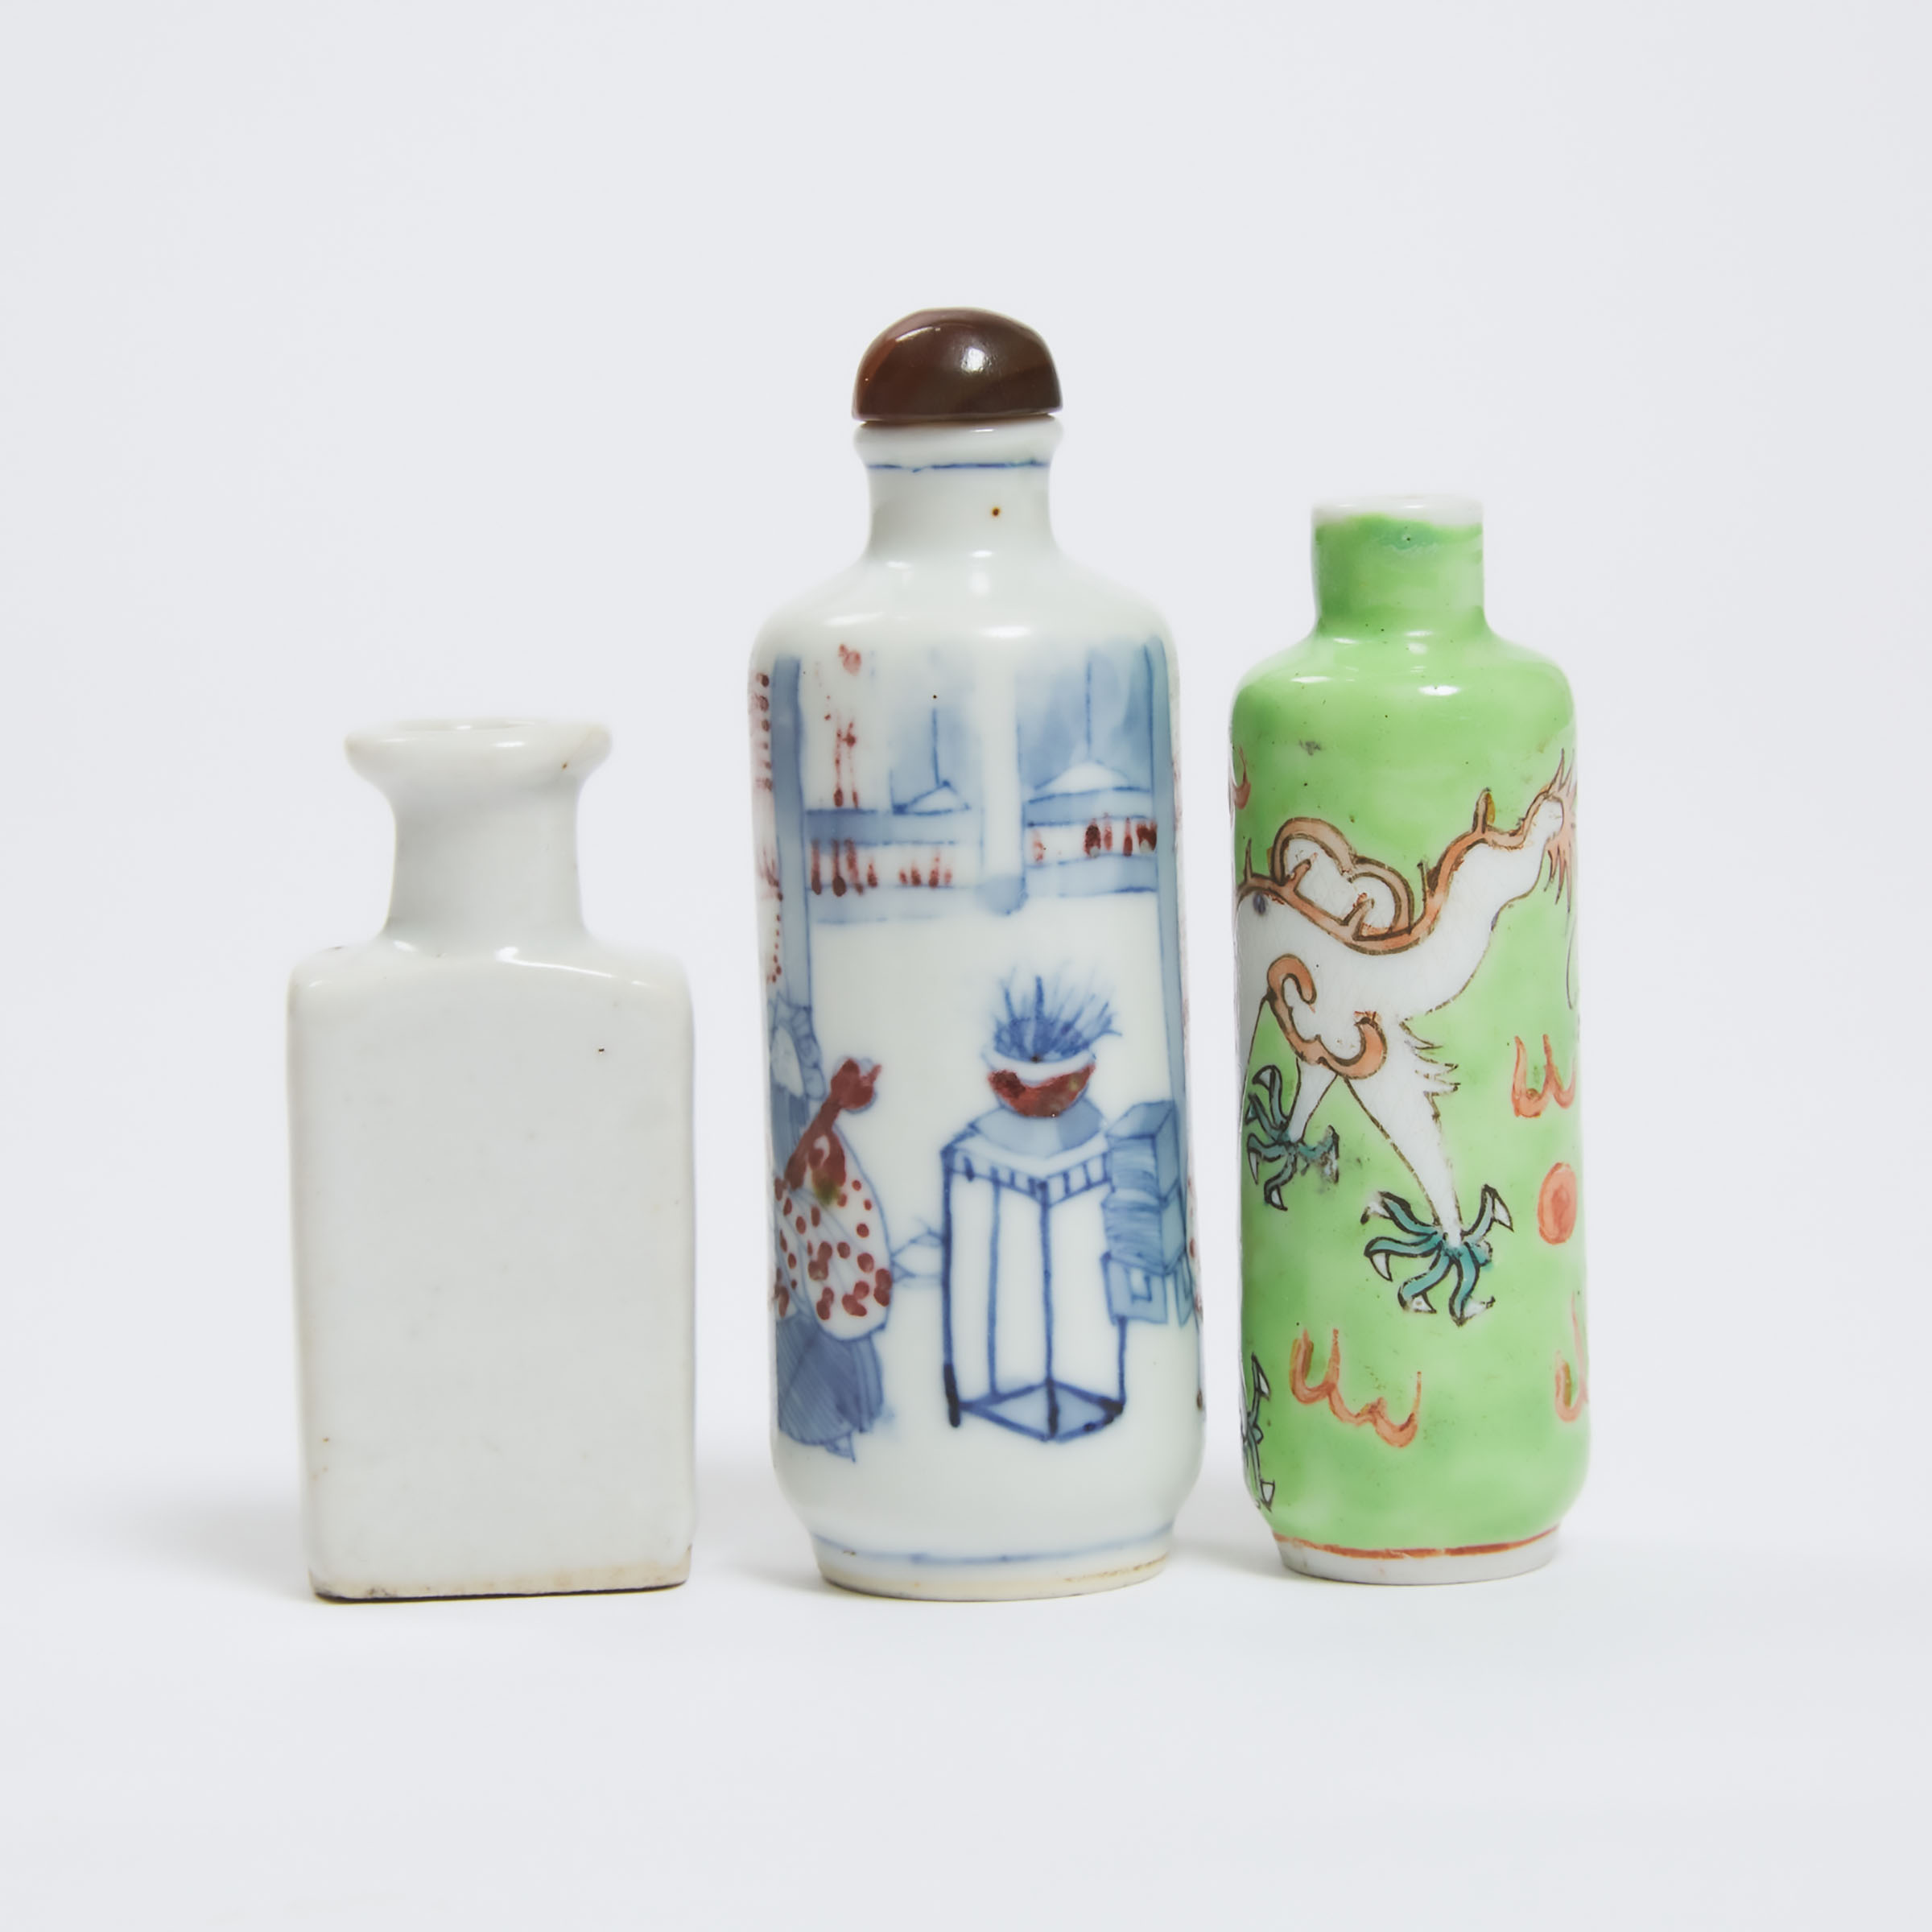 A Group of Three Snuff Bottles, Qing Dynasty, 19th Century